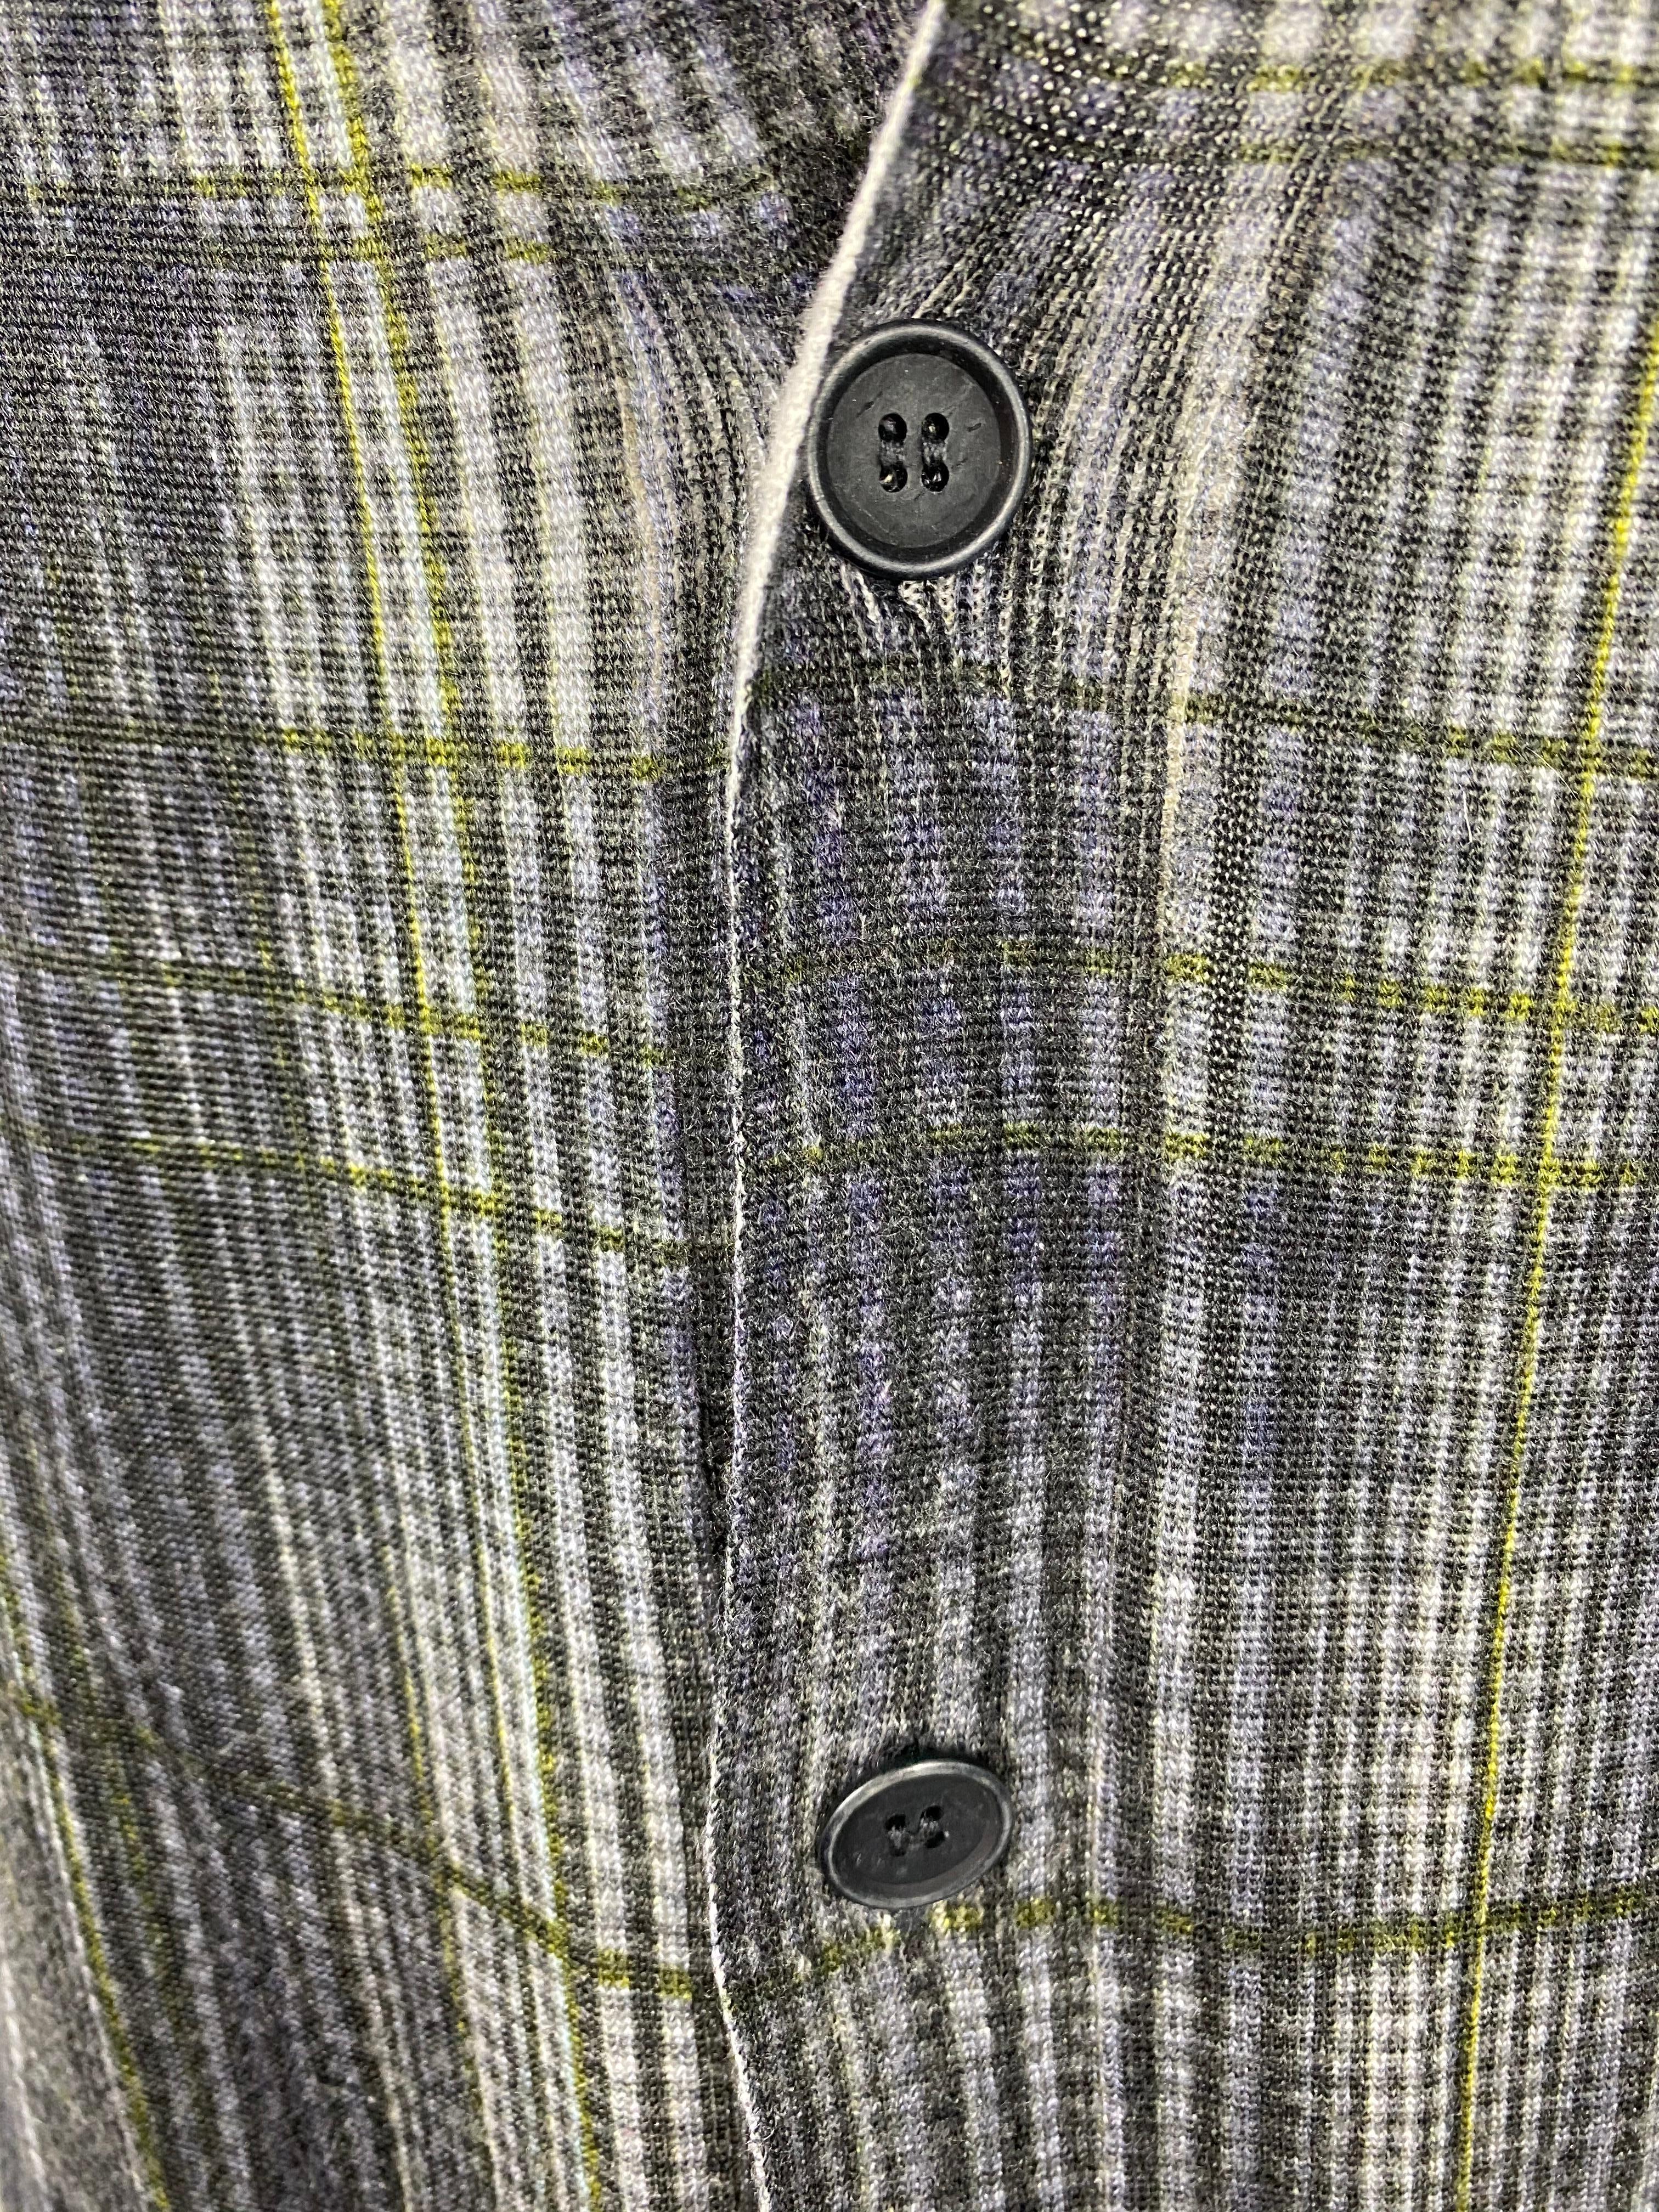 Product details:

Featuring grey and green plaid pattern, v neck line, front five button down closure.
Made in Italy.